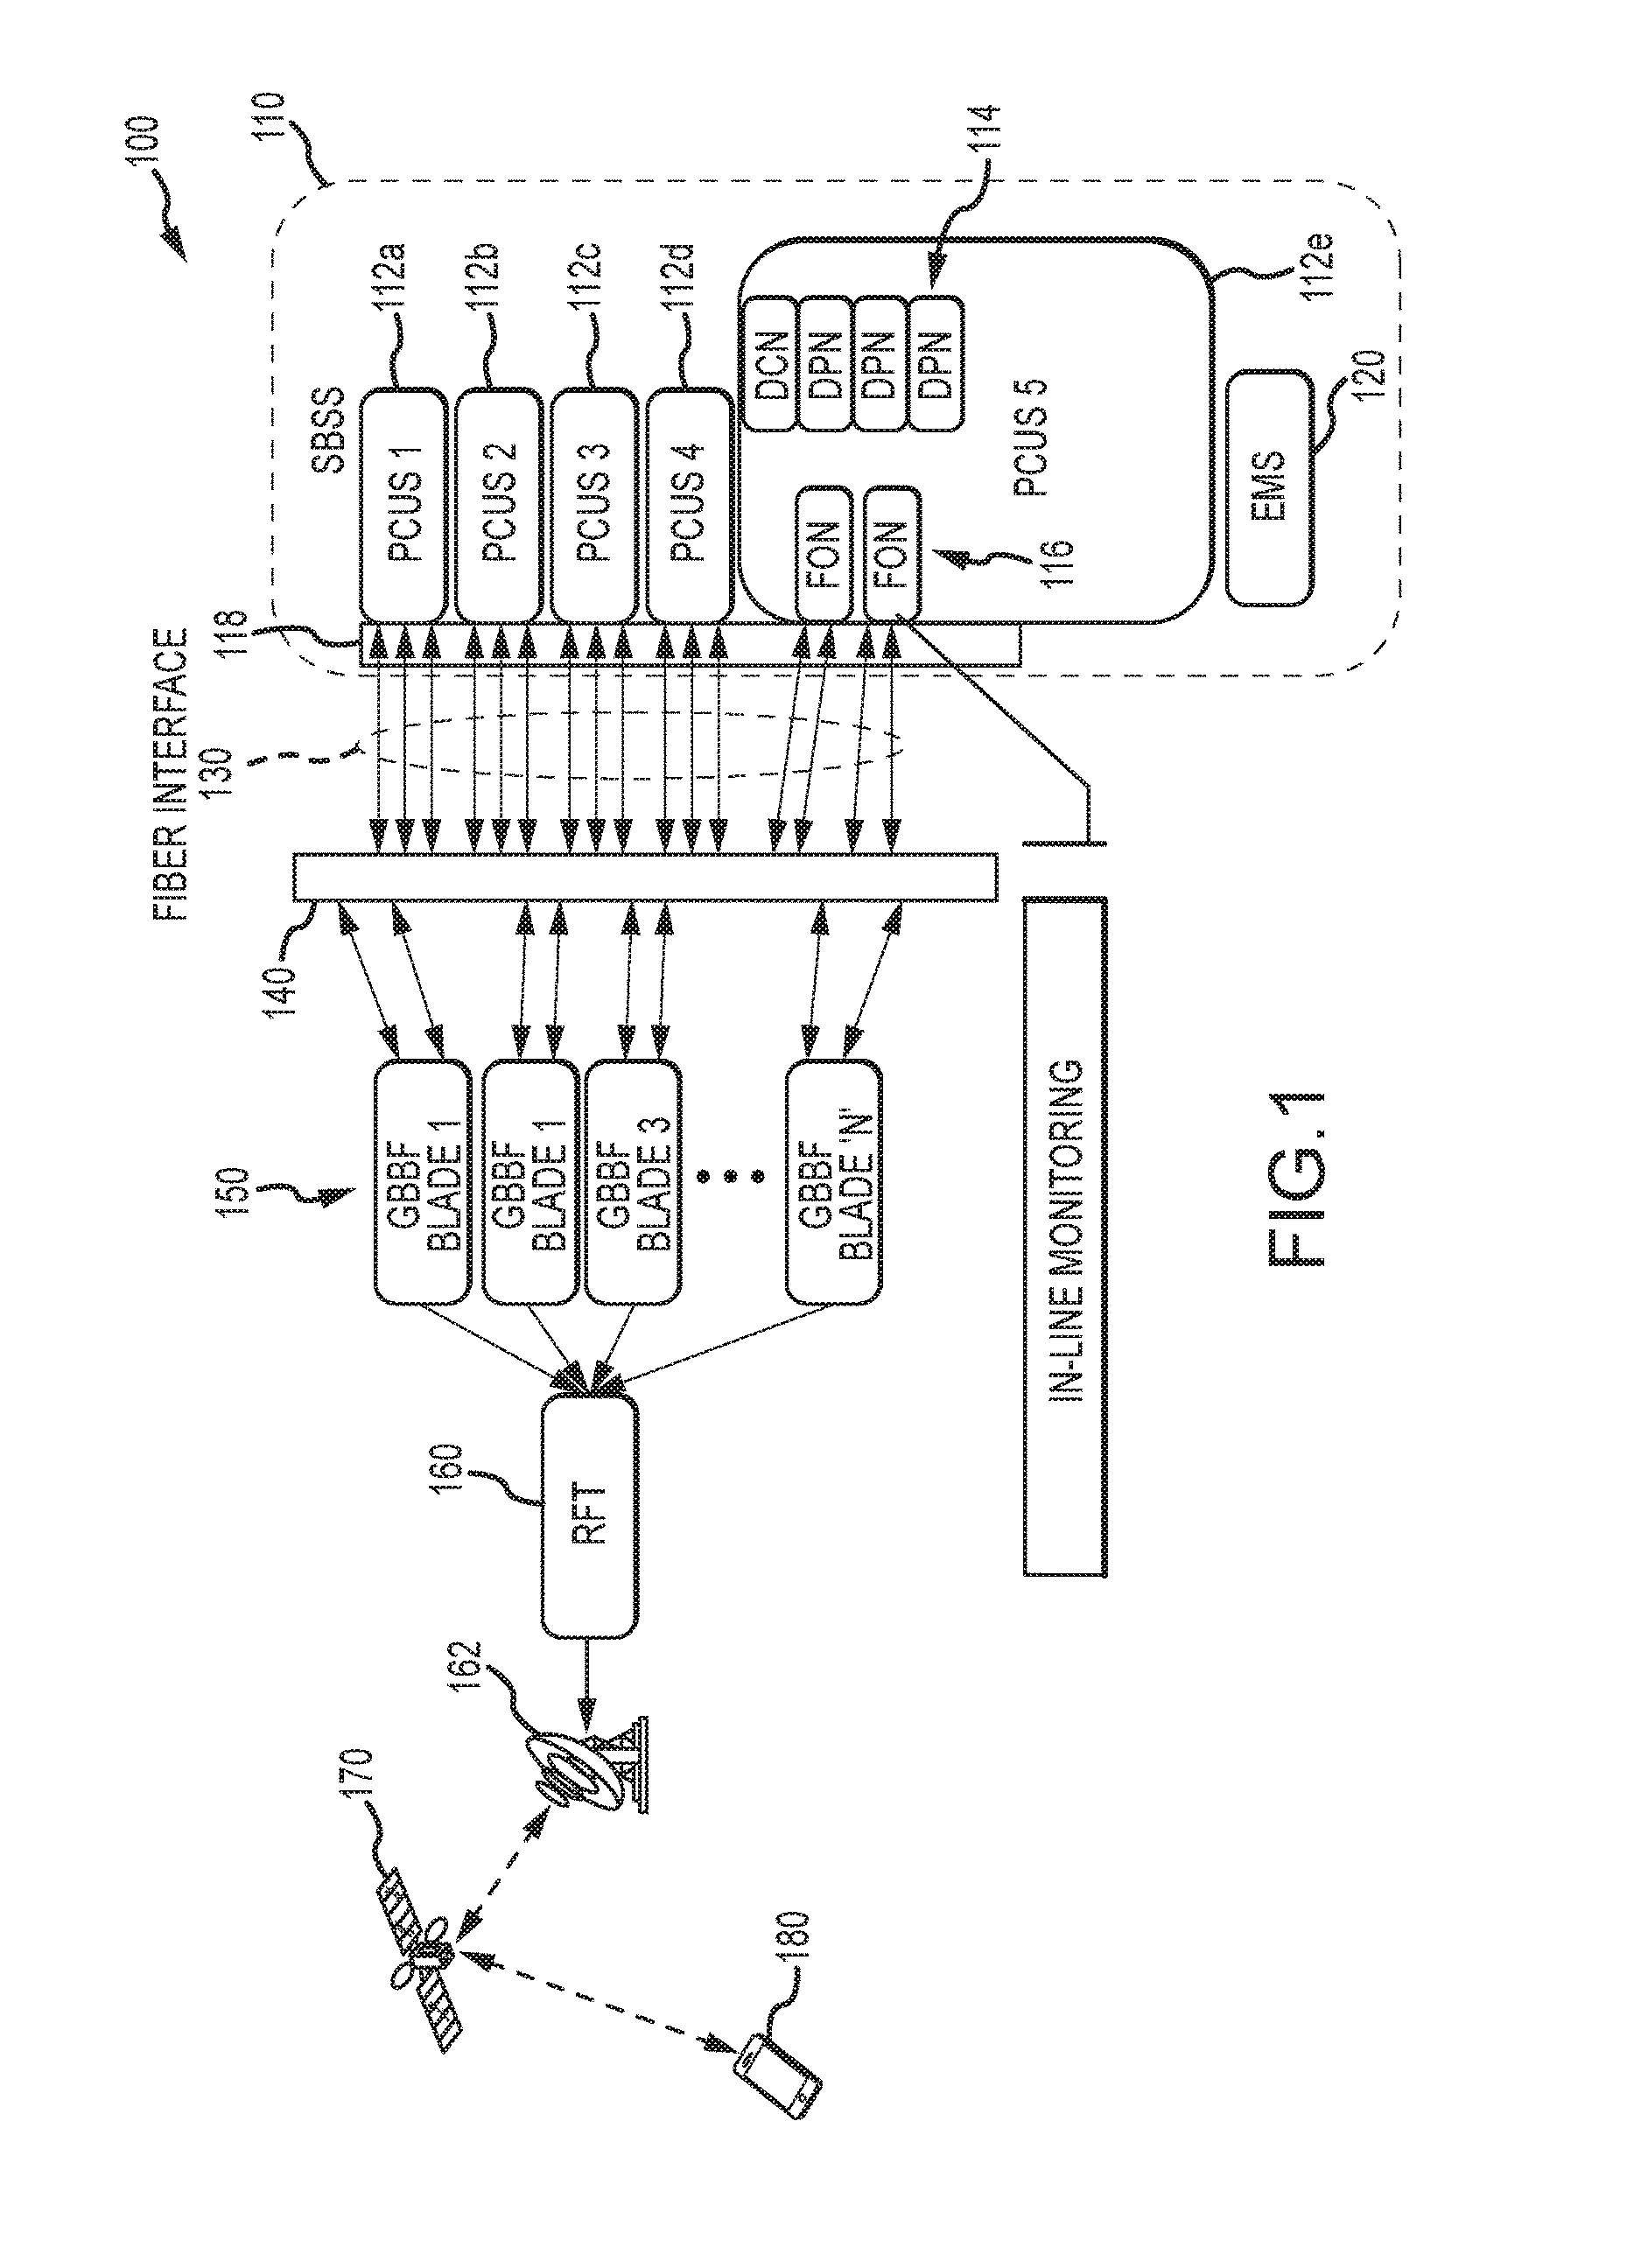 Apparatus and method for inline monitoring of transmission signals